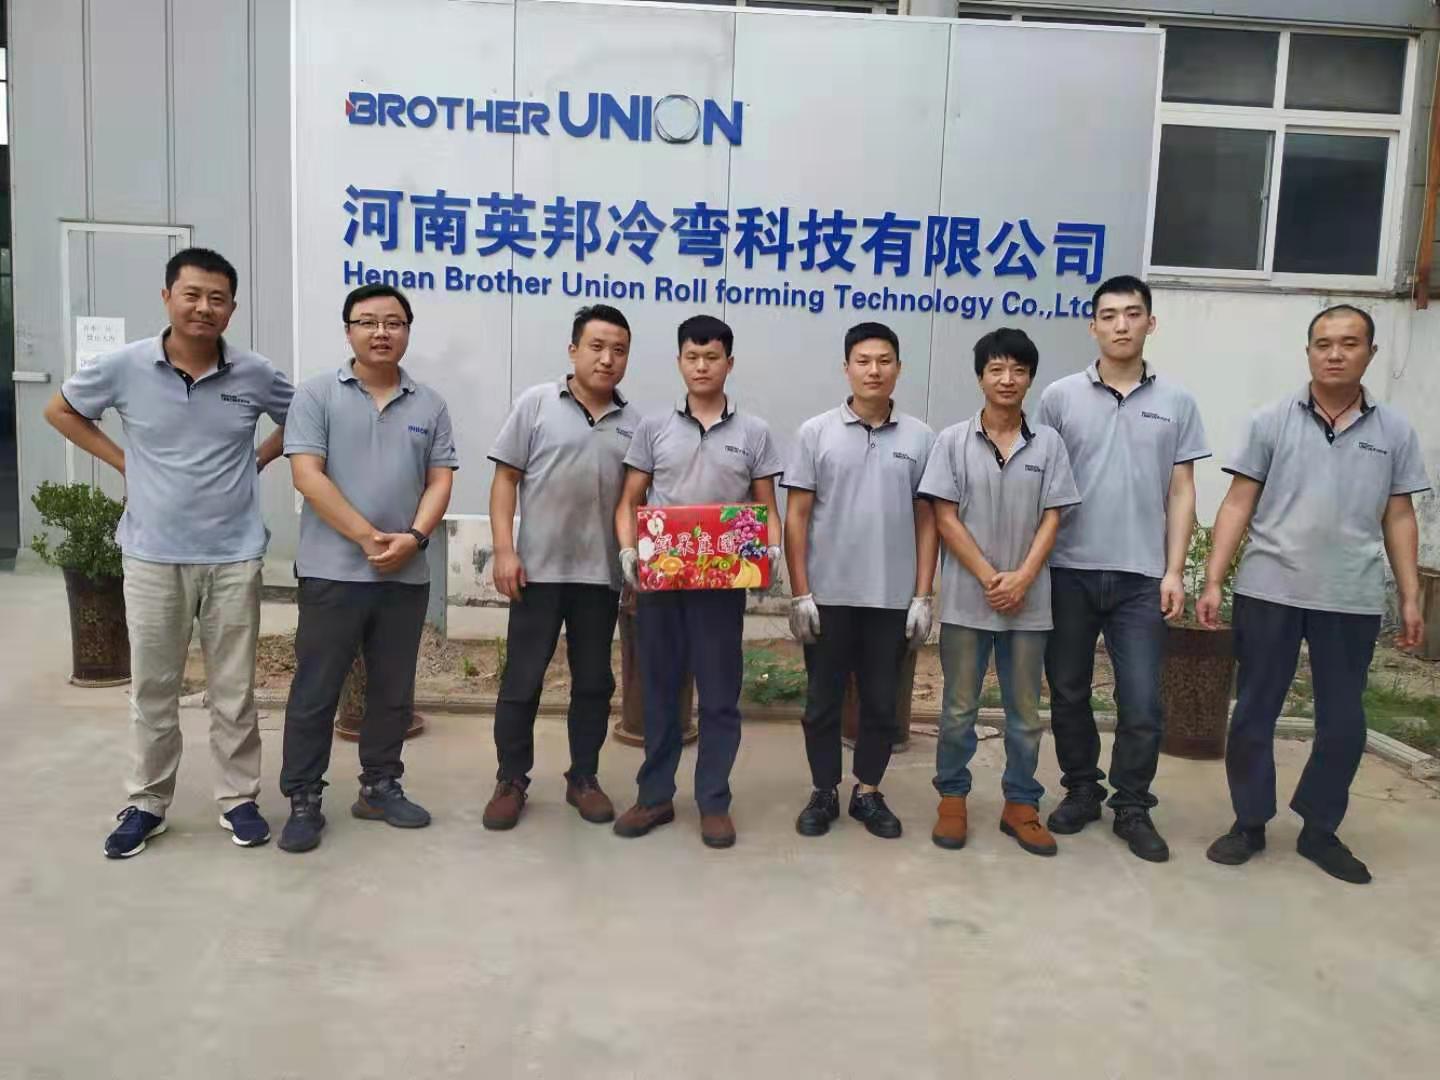 Brother Union Roll Forming Technology Co., Ltd Started Employee Basic Skills Training.